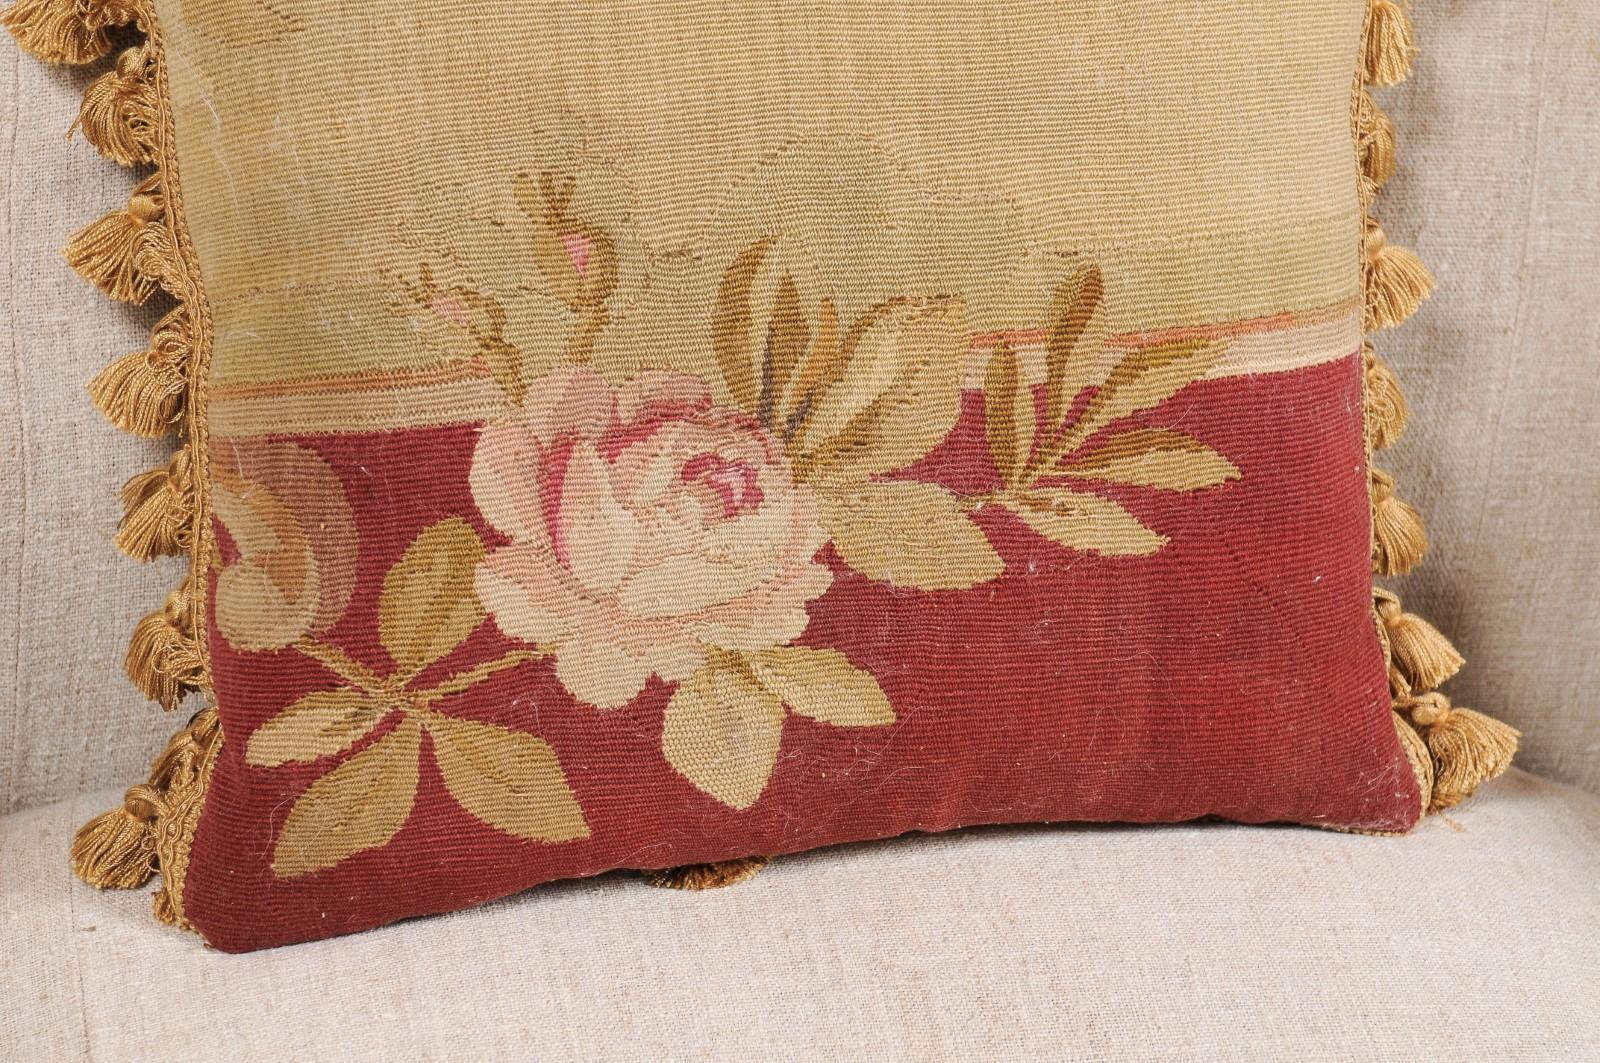 French 19th Century Aubusson Tapestry Pillow with Rose, Foliage and Tassels For Sale 1